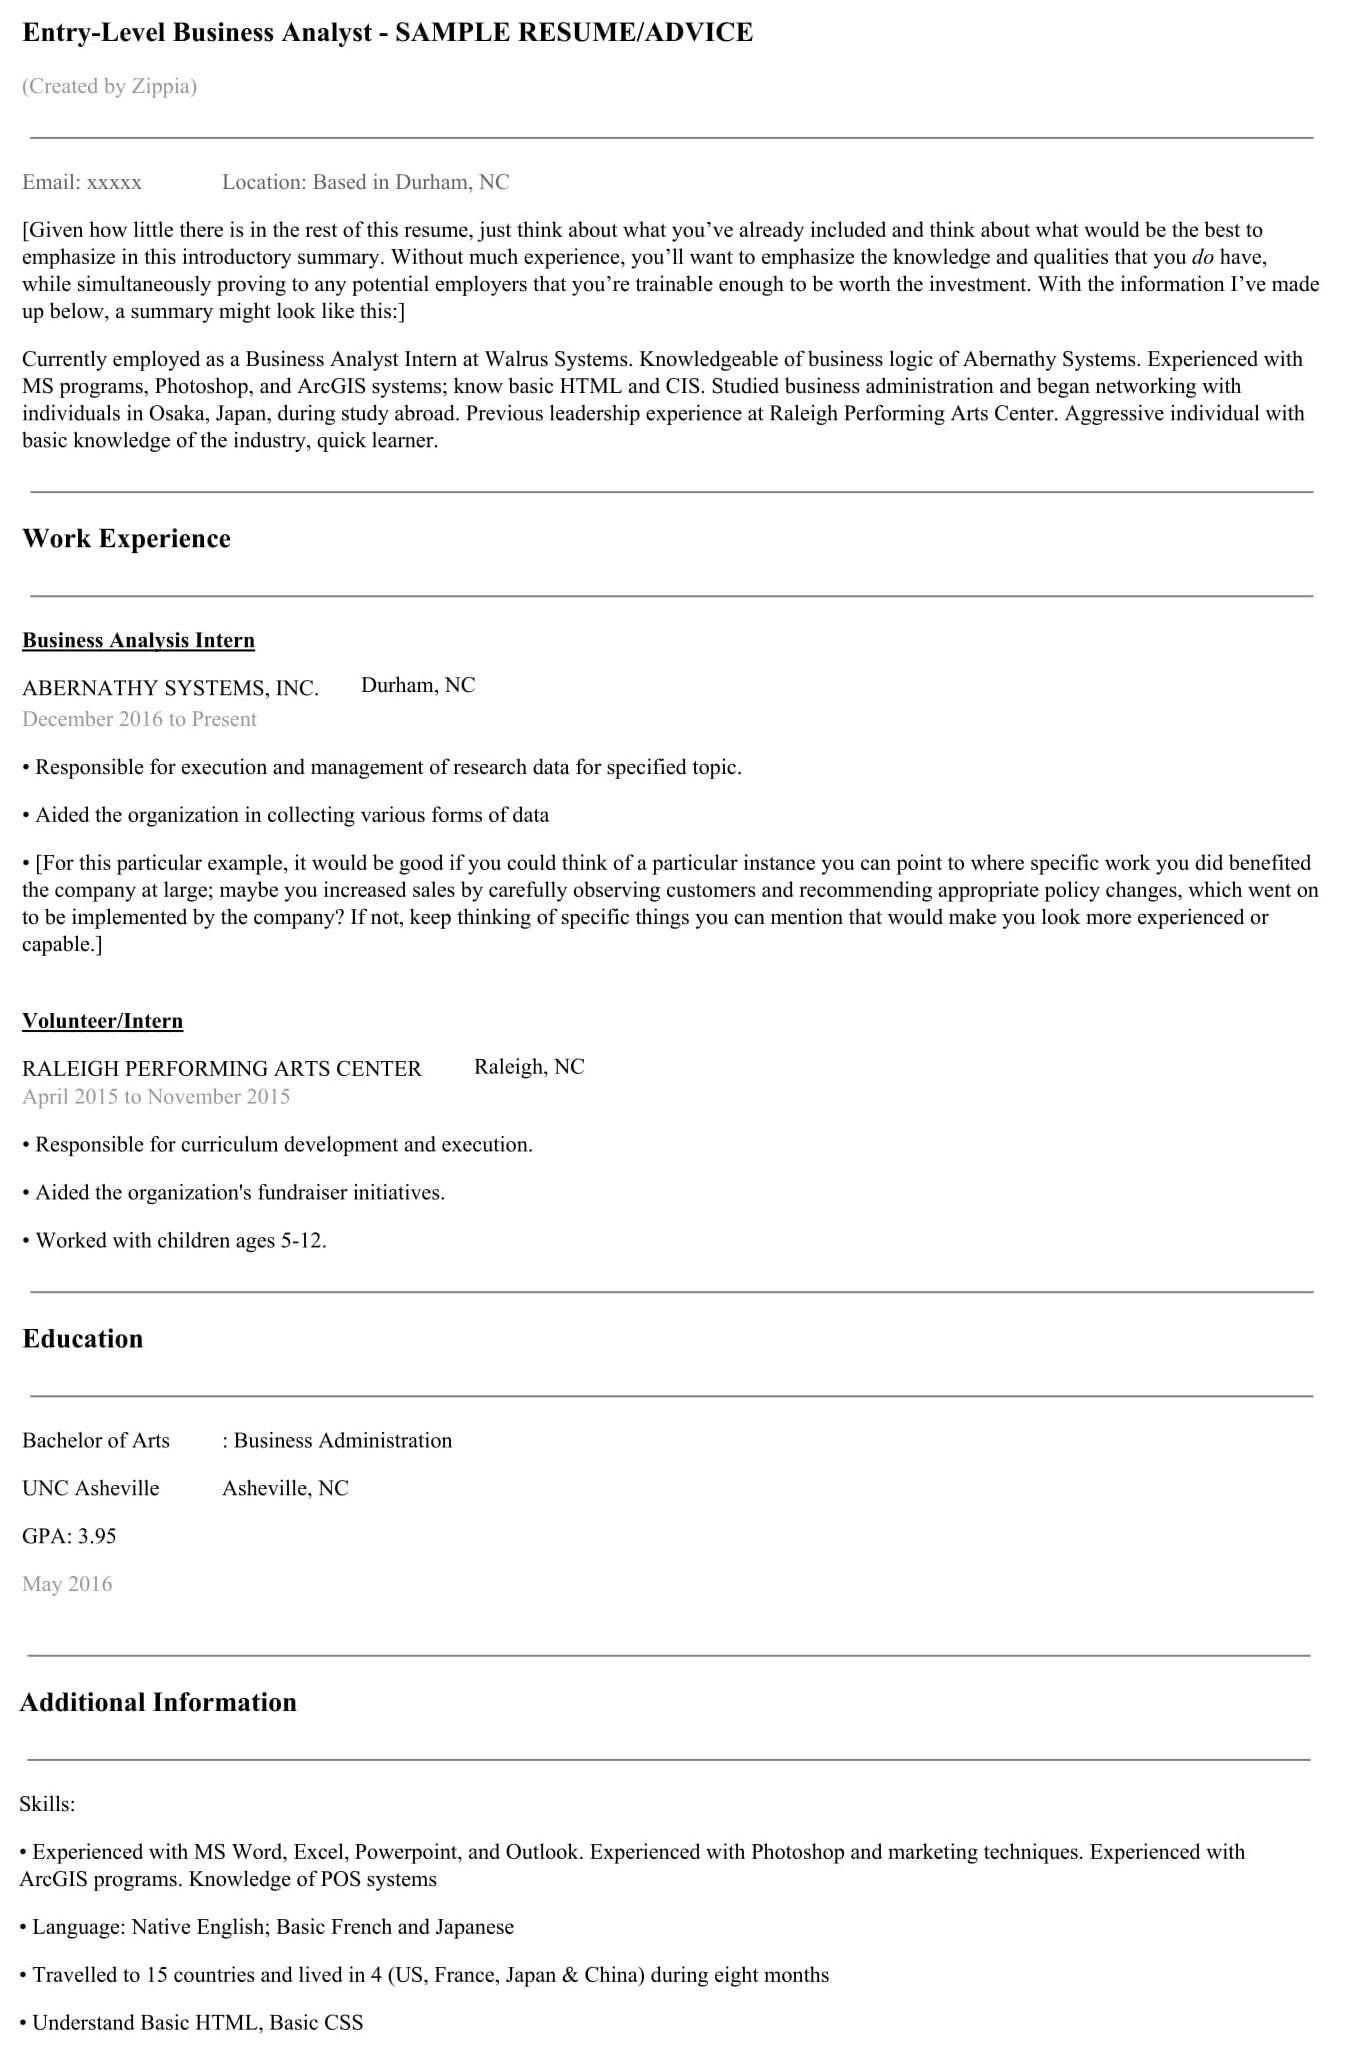 Business Analyst Non It Sample Resume Indeed How to Write the Perfect Business Analyst Resume – Zippia